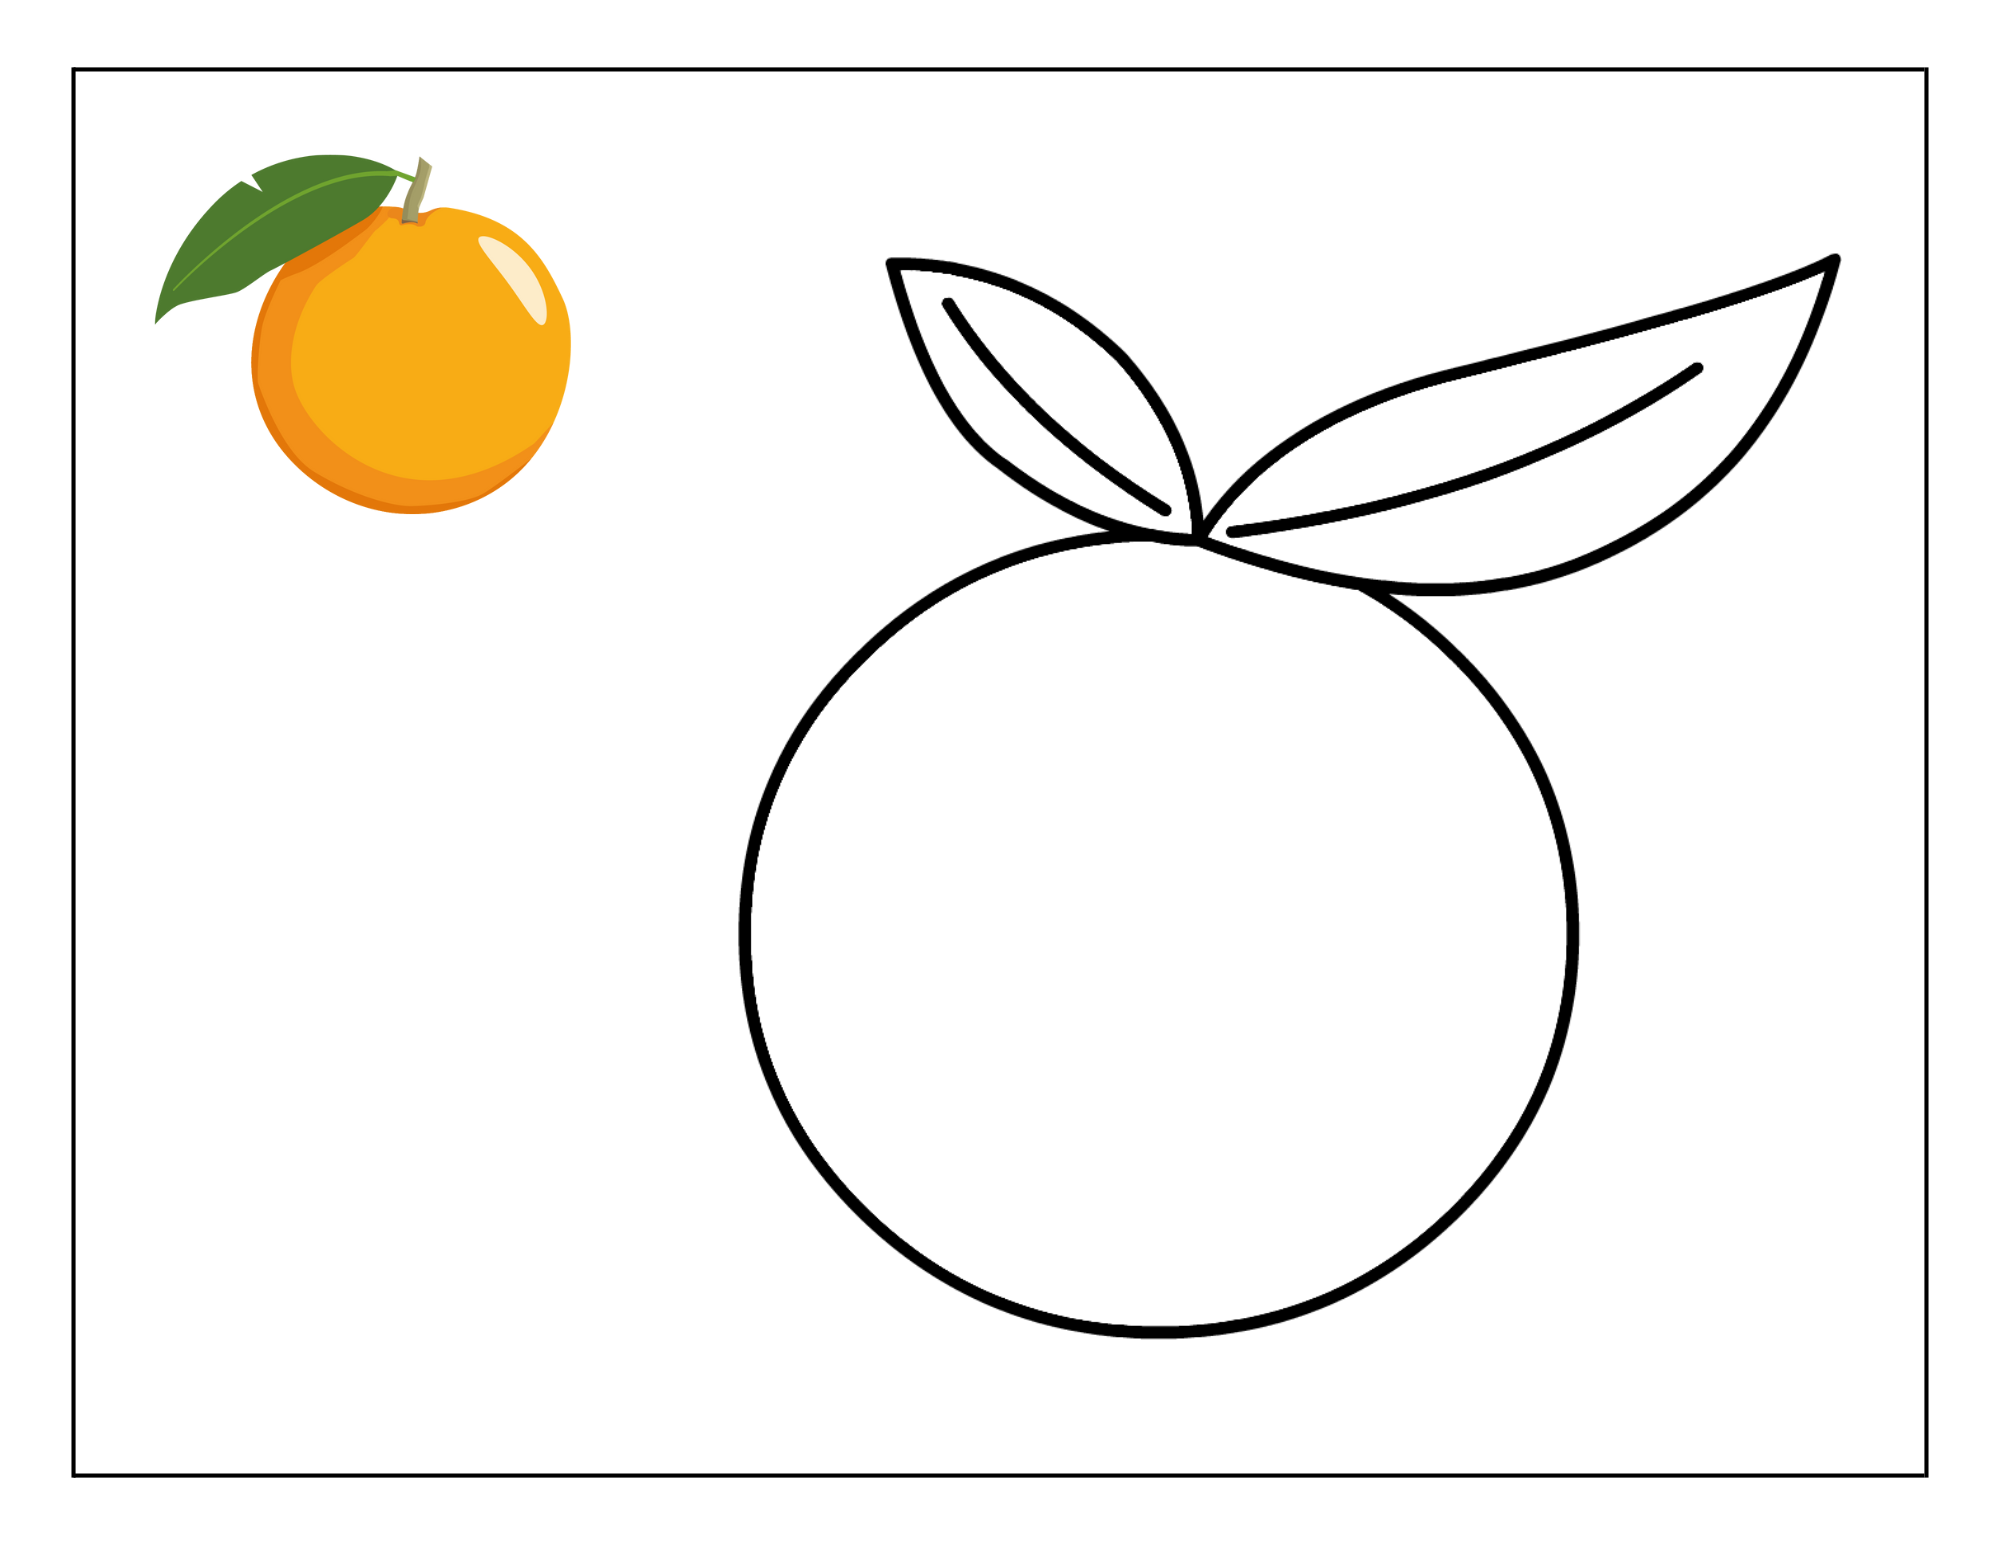 Fruit coloring pages for toddlers - Orange